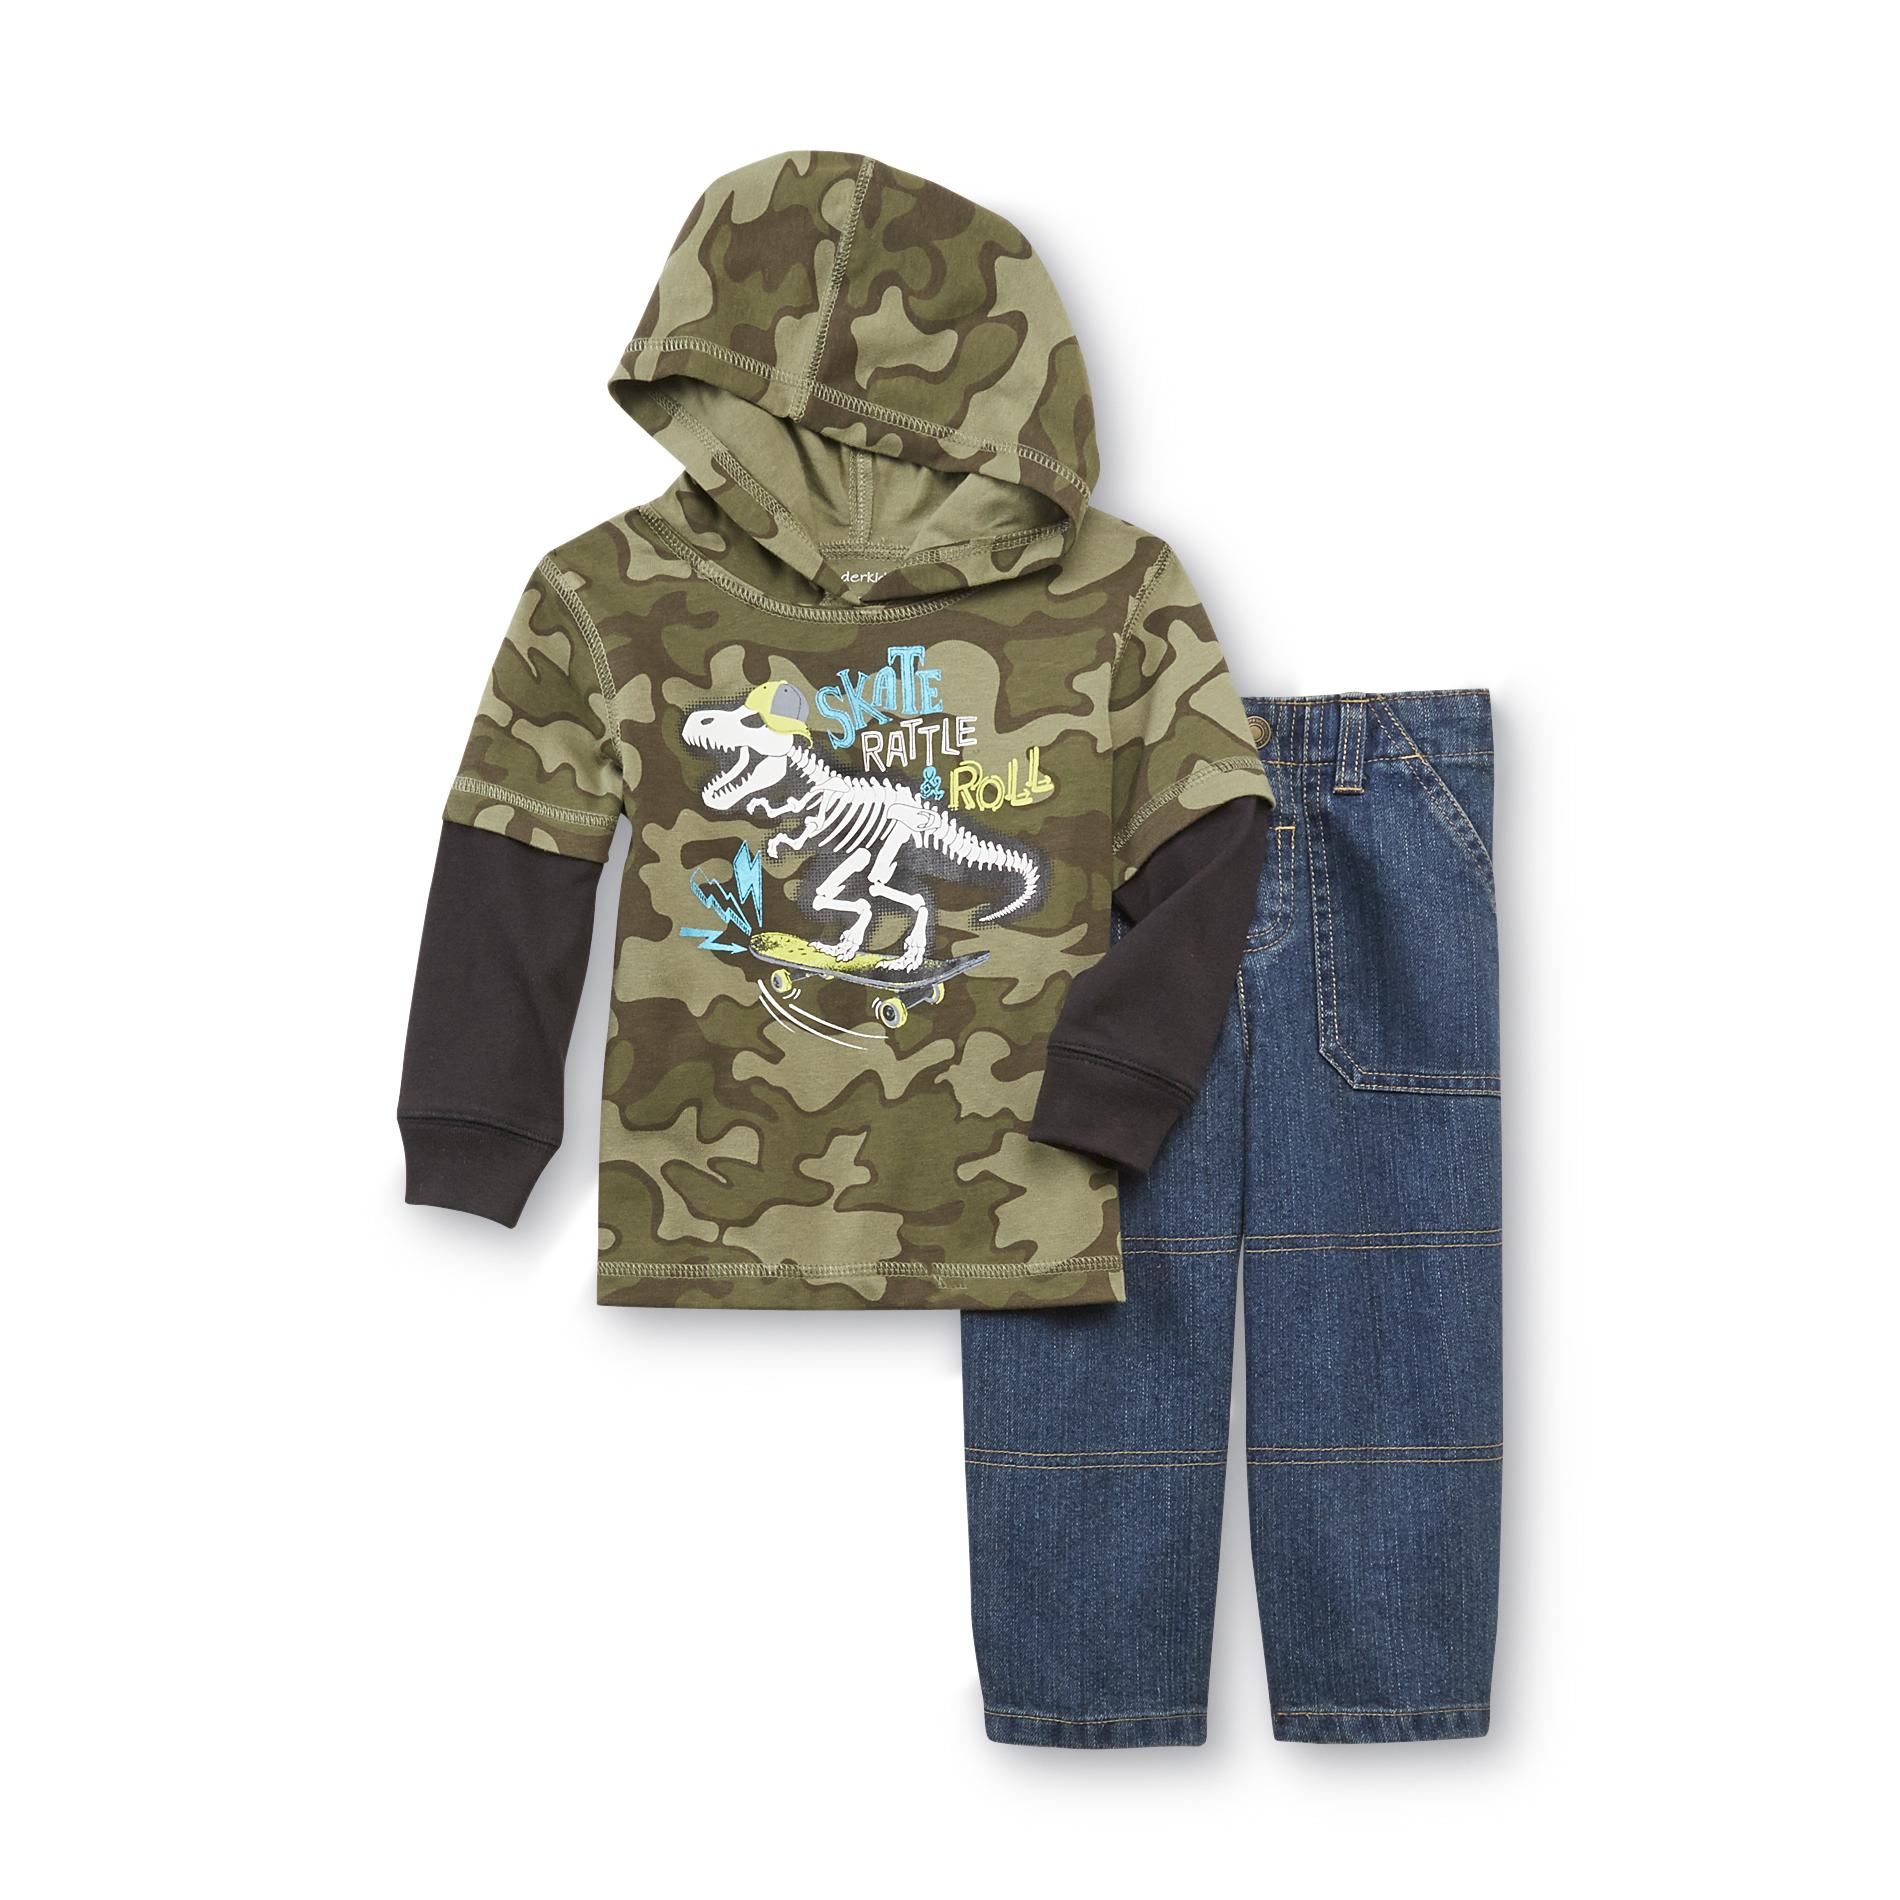 WonderKids Infant & Toddler Boy's Layered-Look Shirt & Jeans - Dino